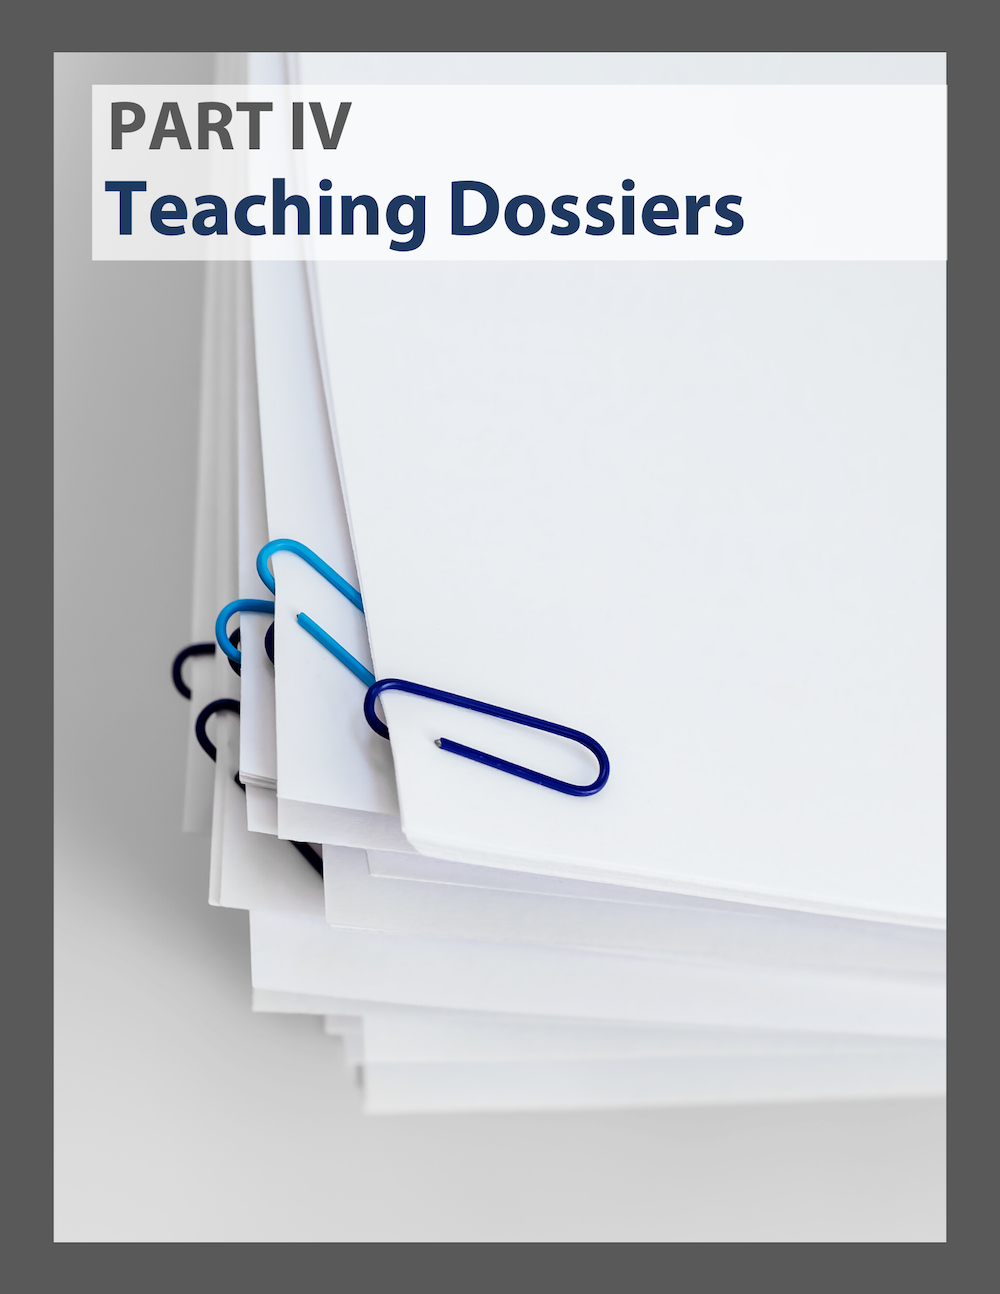 Link to a PDF  - Part 4: Teaching Dossiers